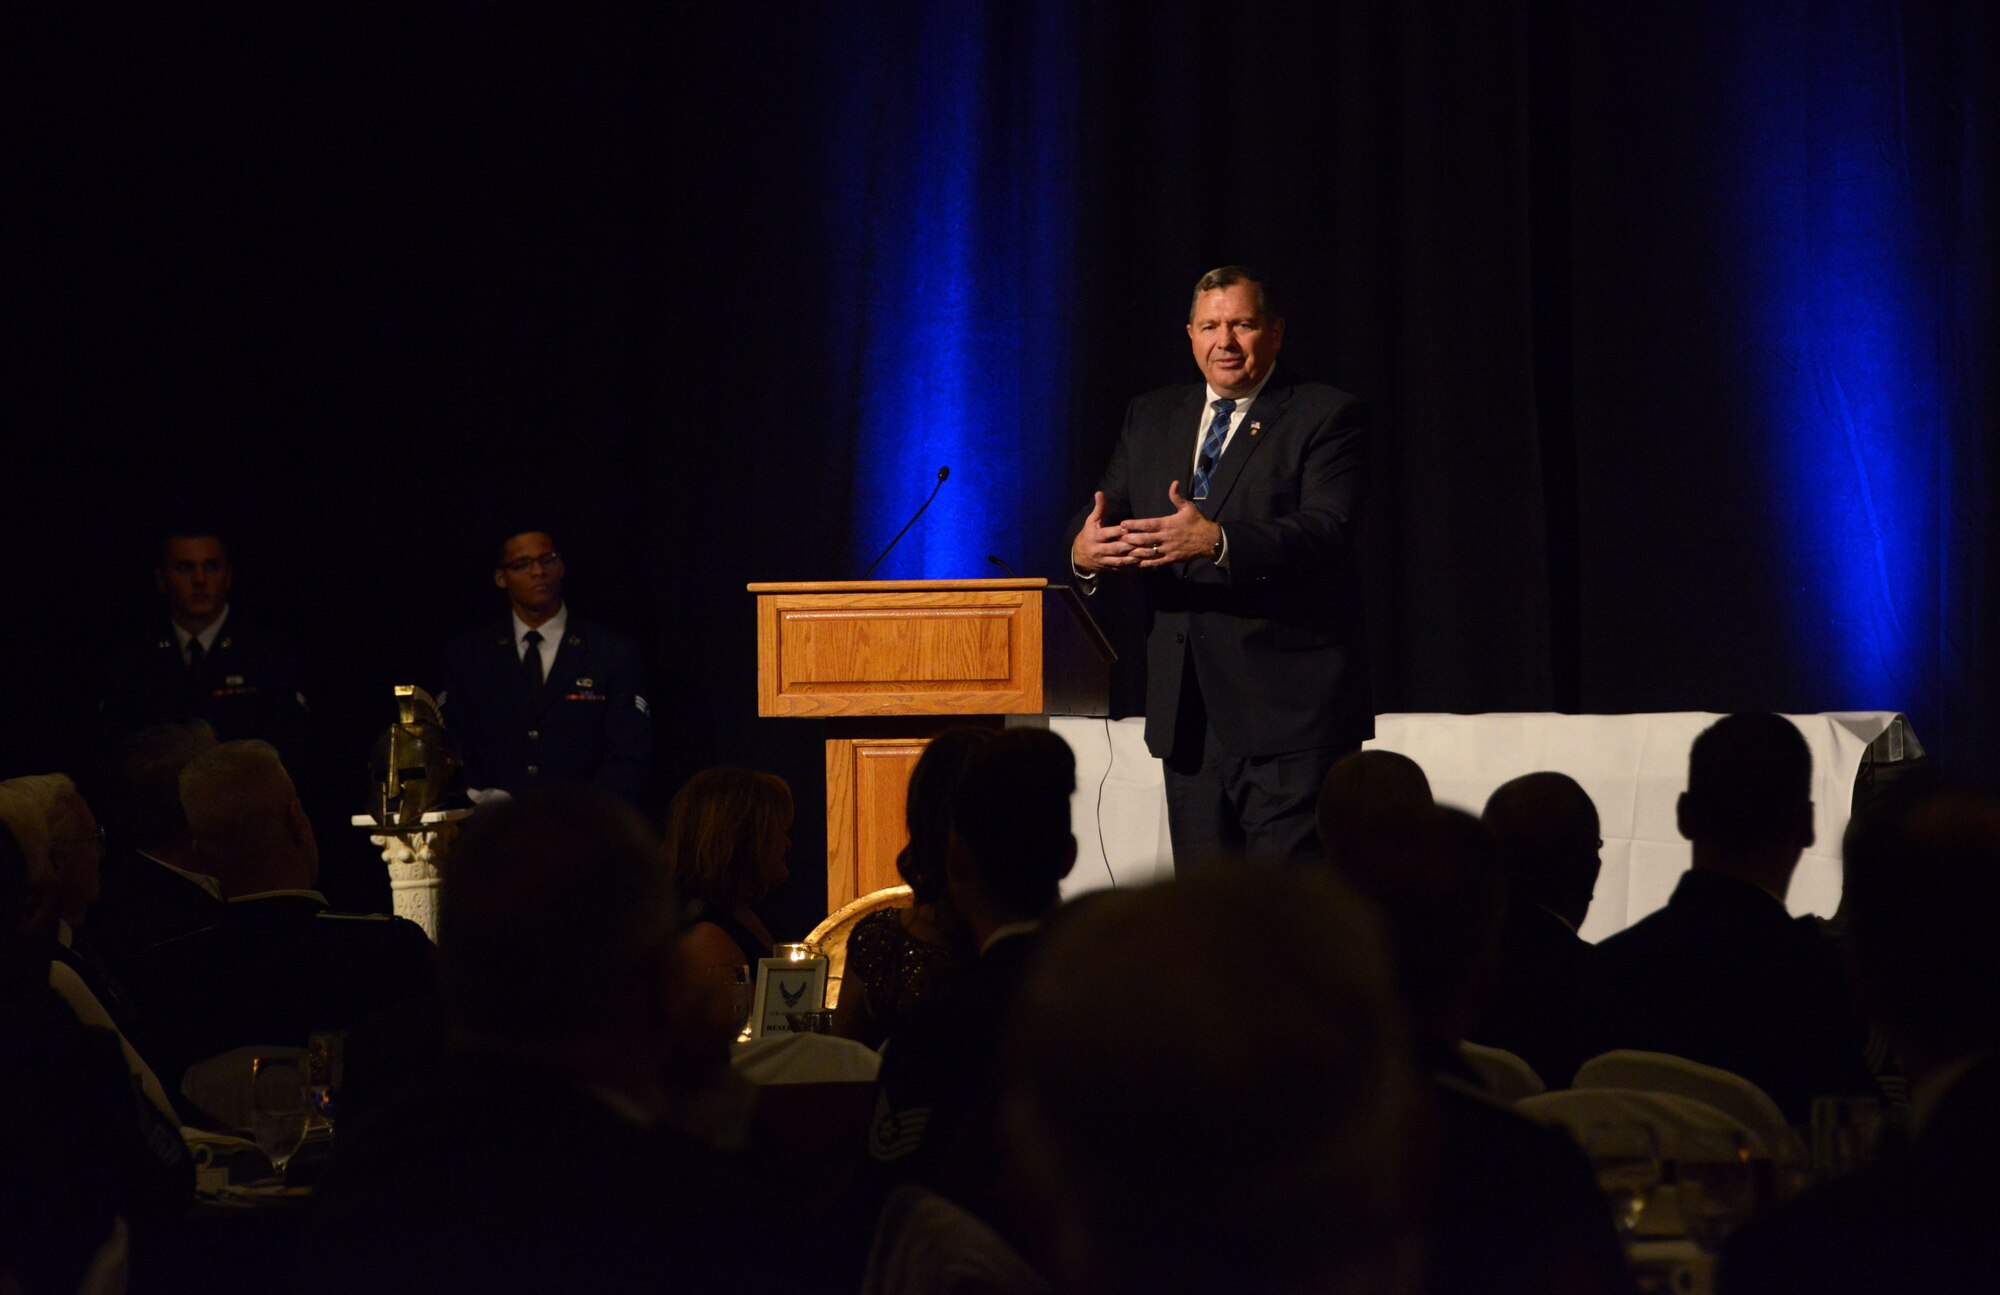 Retired Chief Master Sergeant Scott Dearduff, former 9th Air Force Command Chief, provides the keynote speech during the 2017 Annual Awards Banquet at The Wigwam in Litchfield Park, Ariz., Jan. 20, 2018. During his speech, Dearduff spoke about what it means to have a warrior spirit. (U.S. Air Force Photo/Airman 1st Class Alexander Cook)